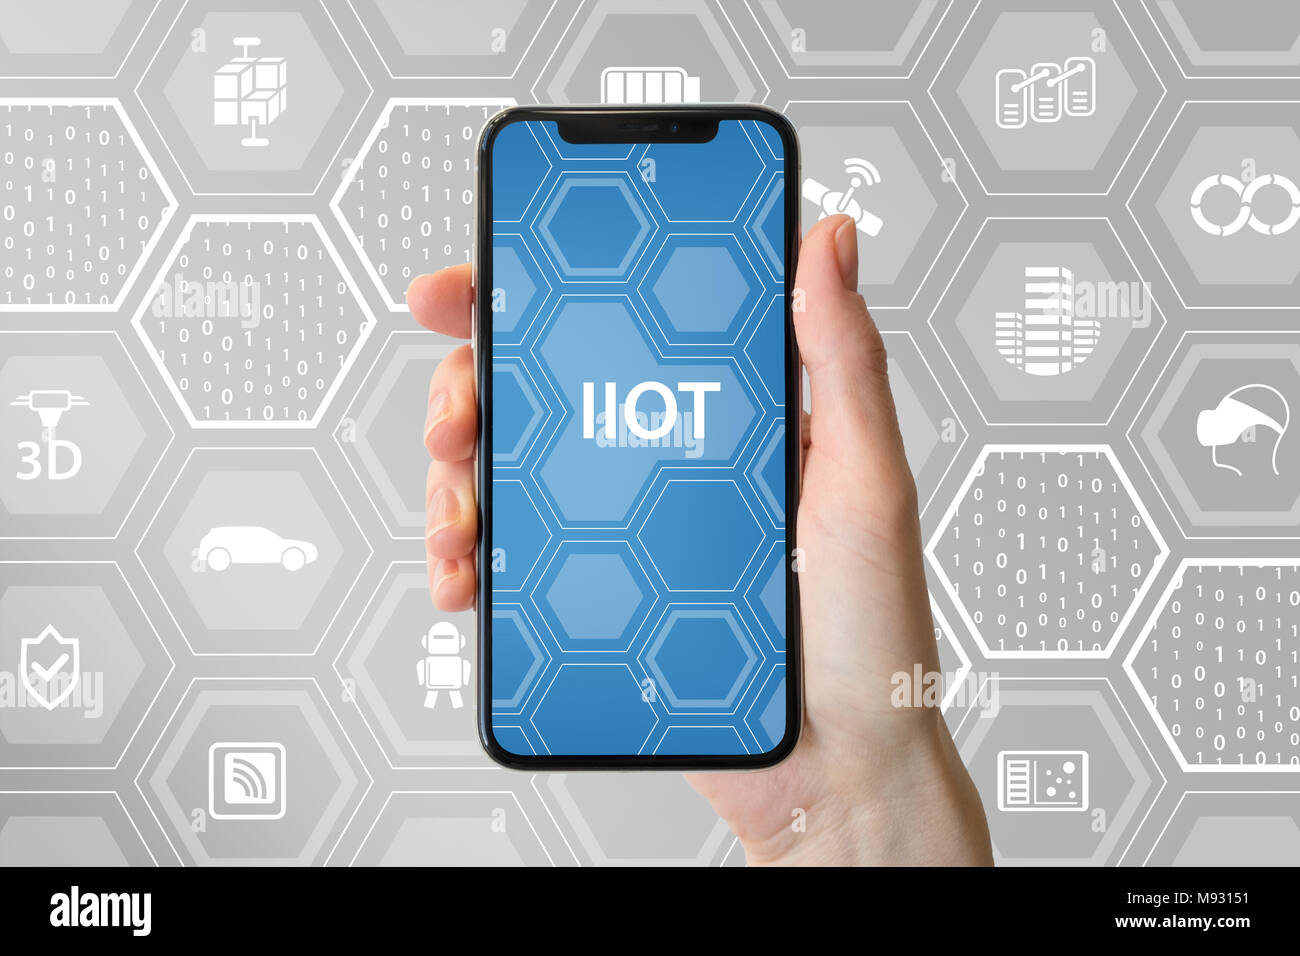 IIOT (industrial internet of things) text displayed on screen of modern frameless smartphone. Hand holding smartphone. Stock Photo